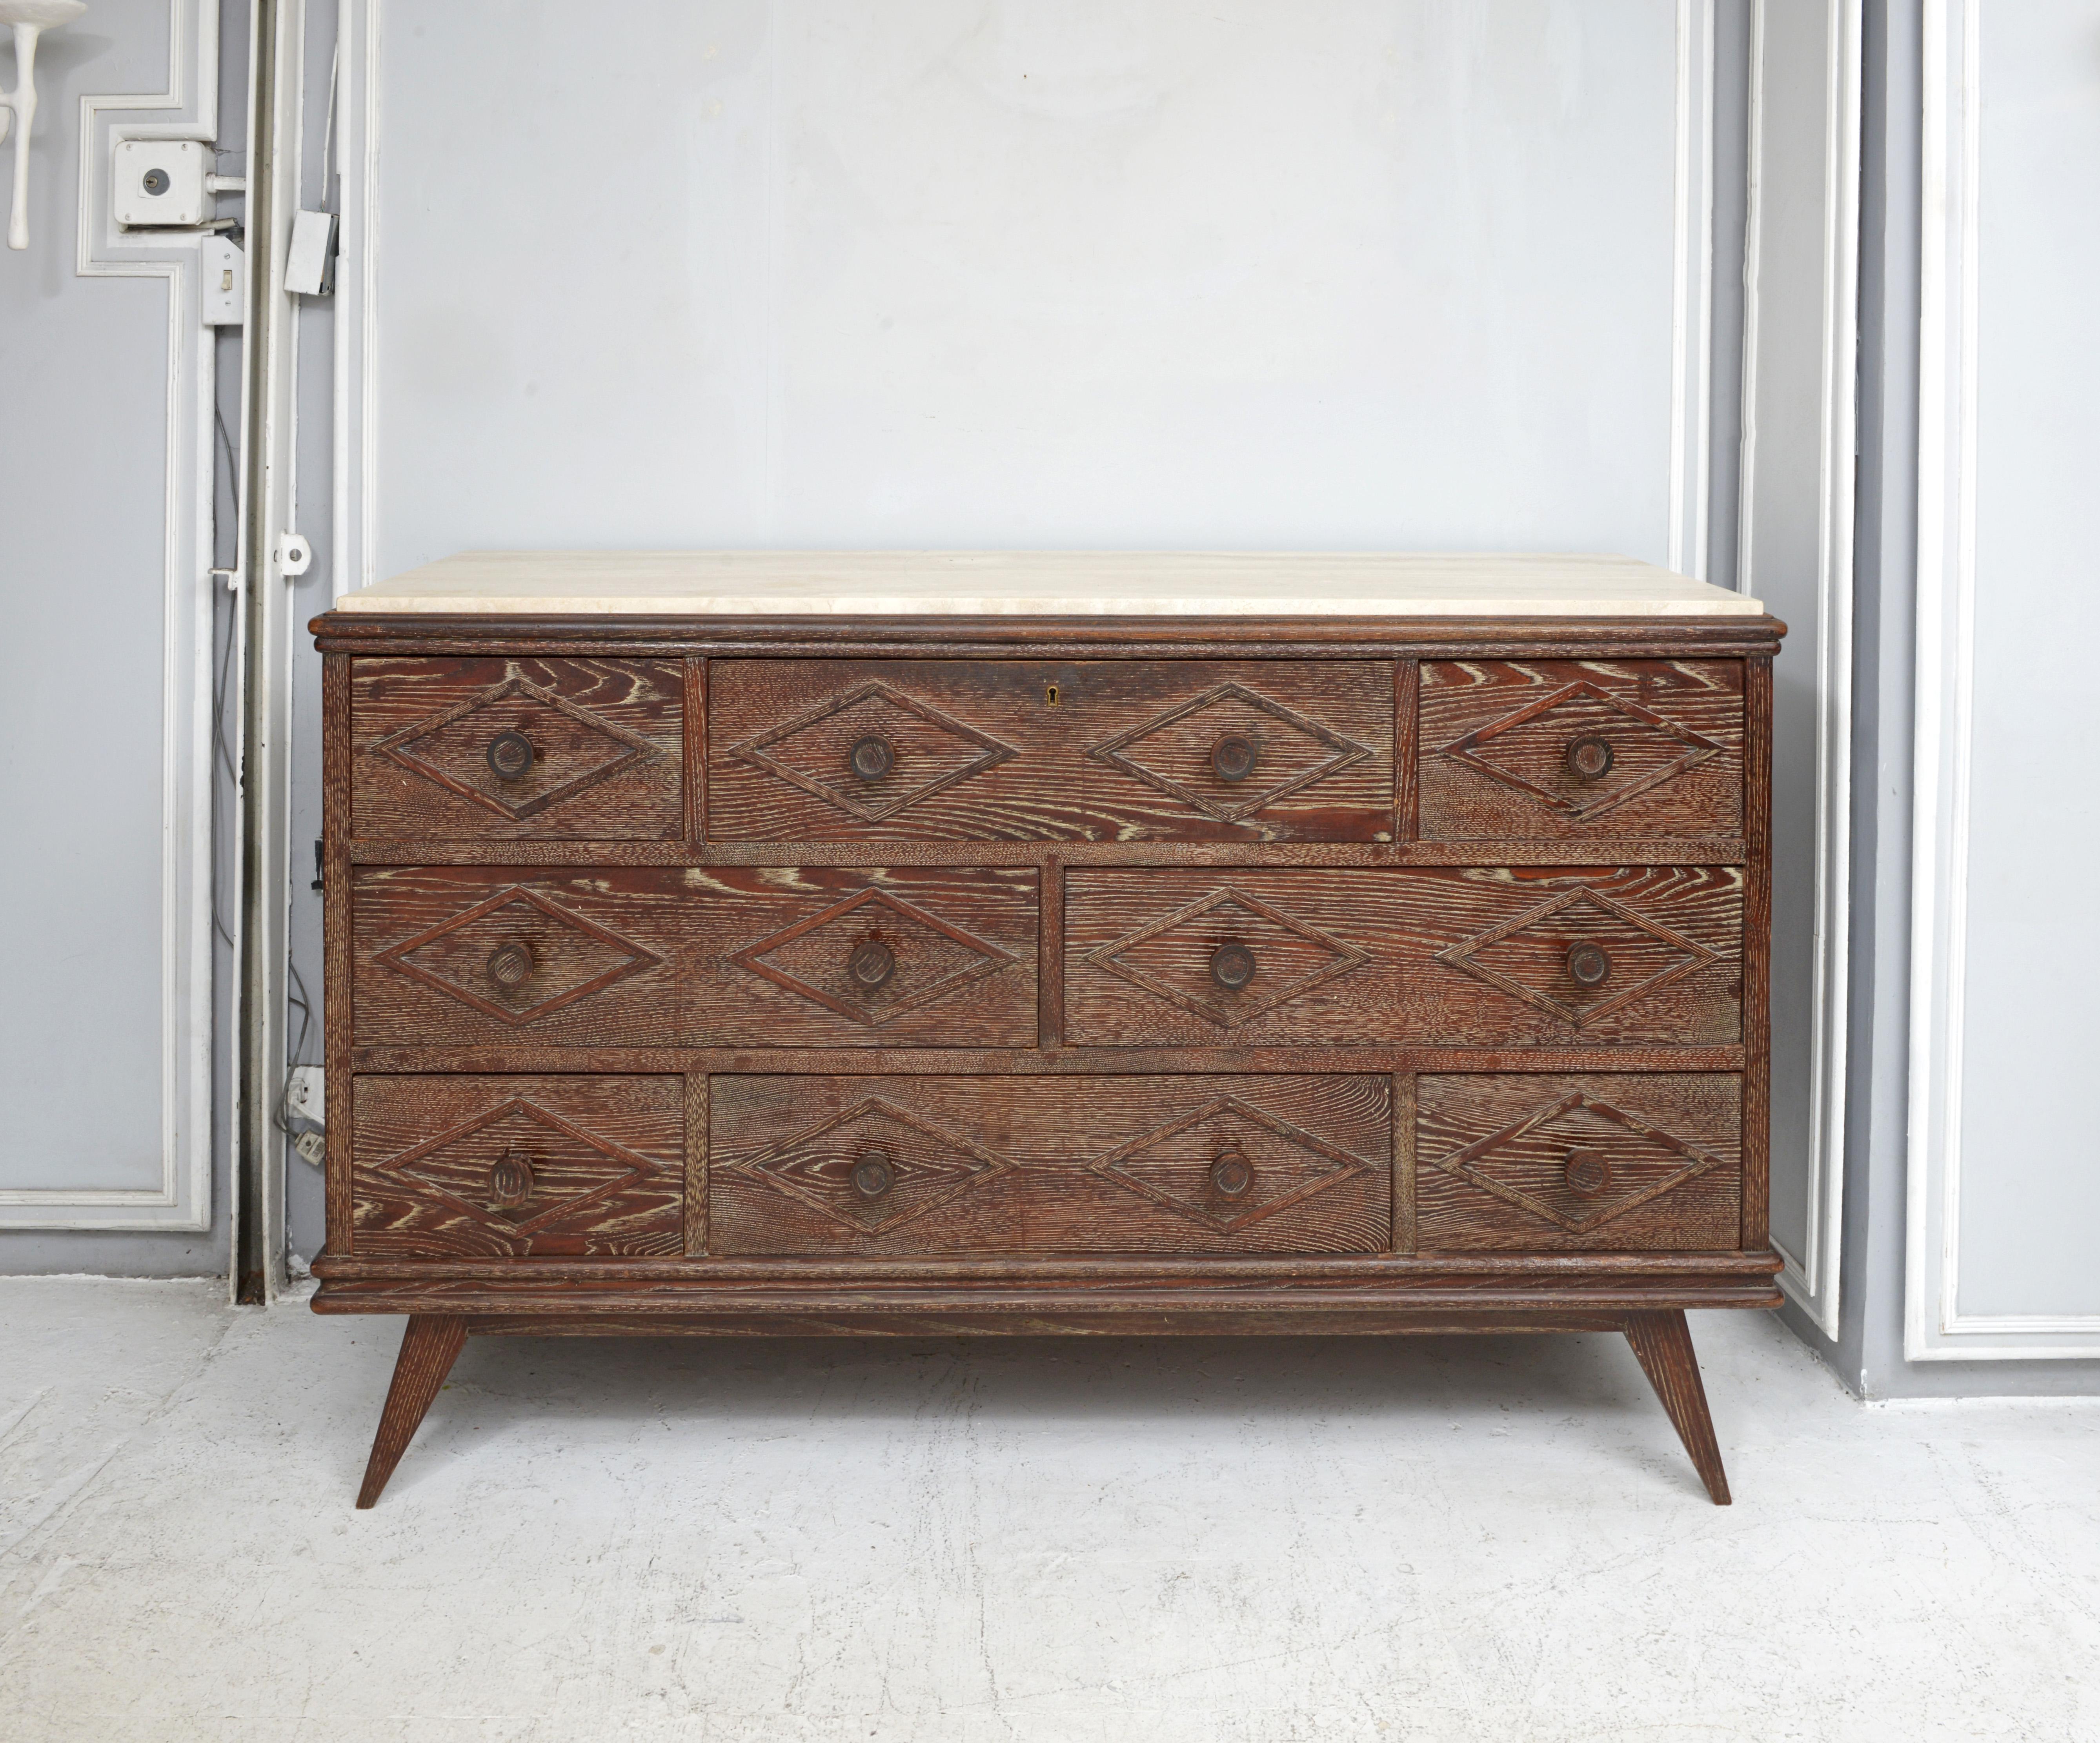 French midcentury cerused oak chest /cabinet with a marble top and multiple drawers.